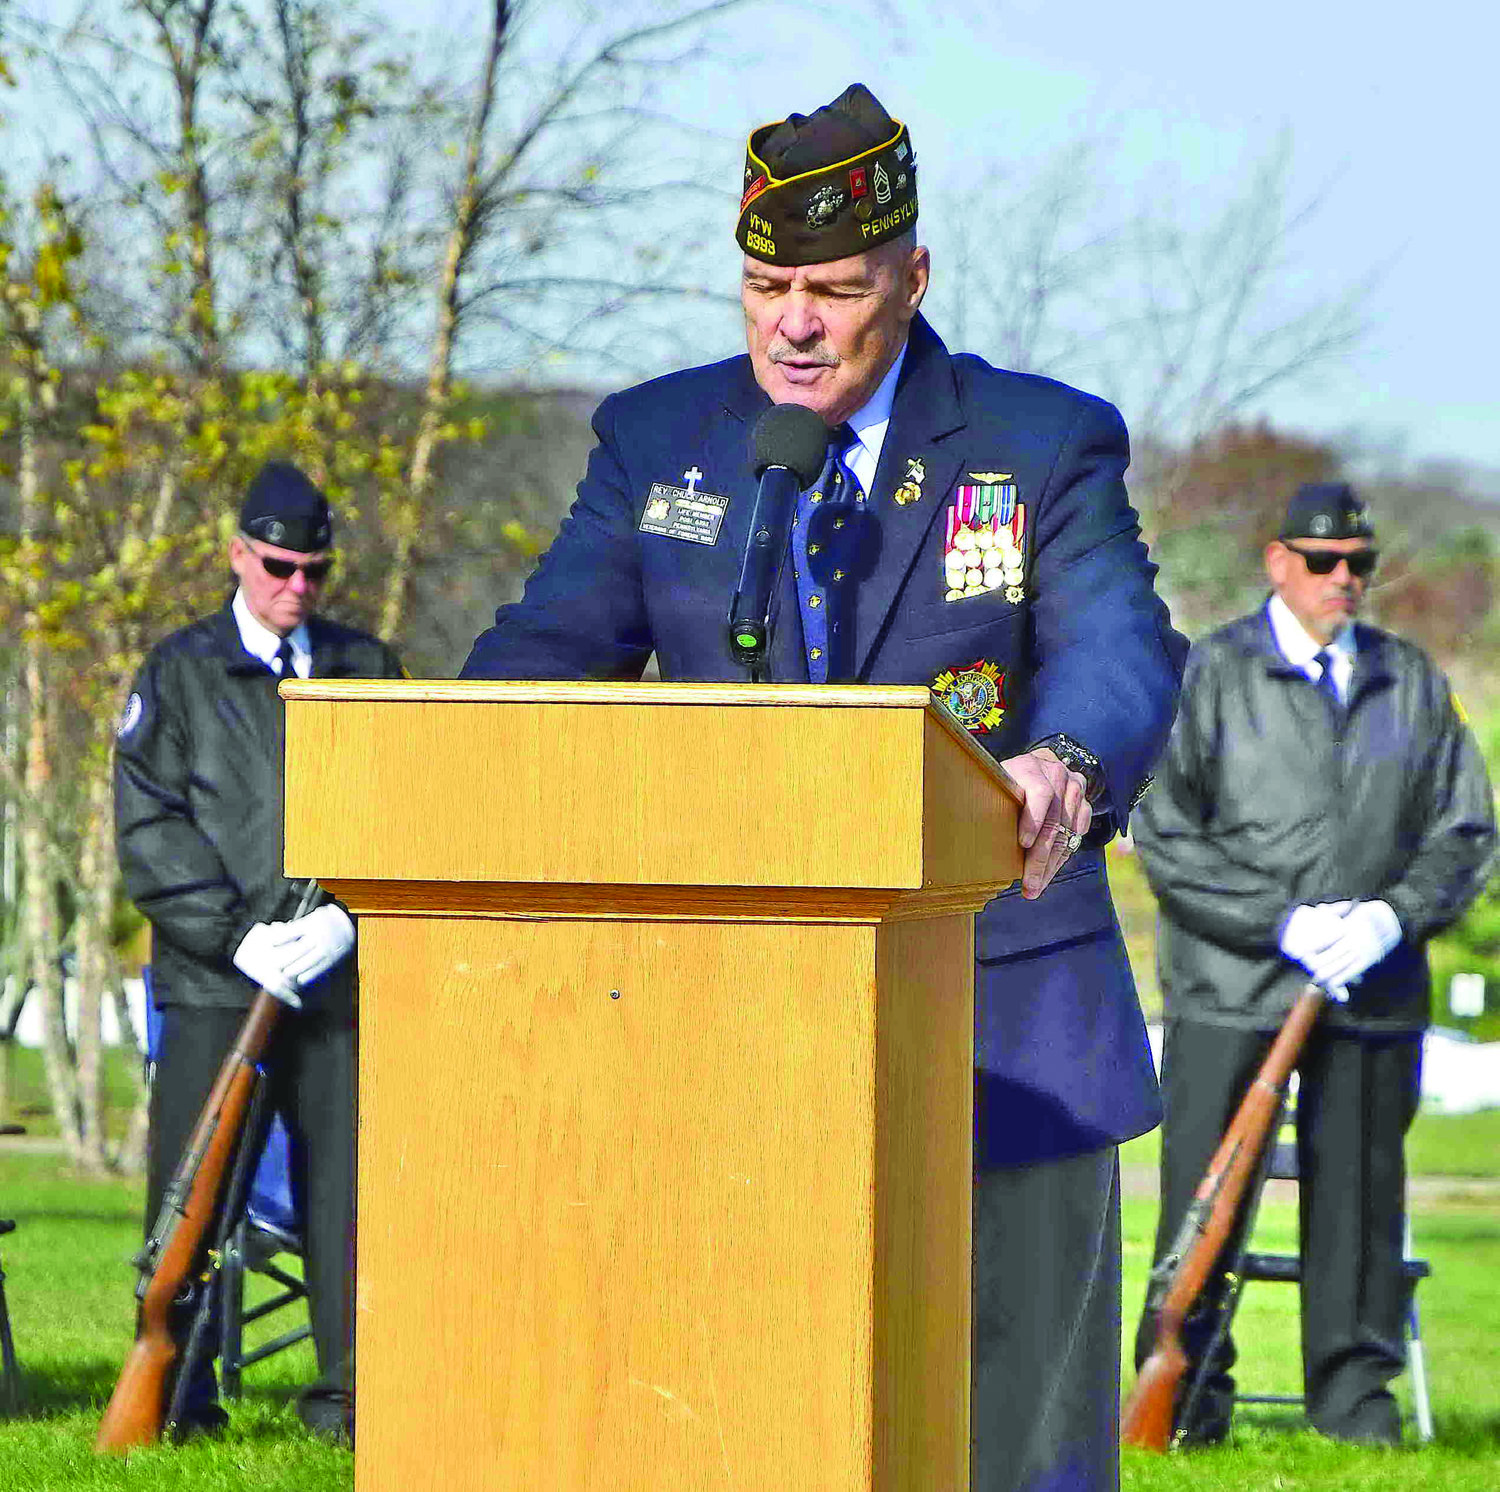 The Rev. Chuck Arnold, life member of Post 6393 Pennsylvania Veterans of Foreign Wars, delivers the opening benediction at the beginning of the ceremony.